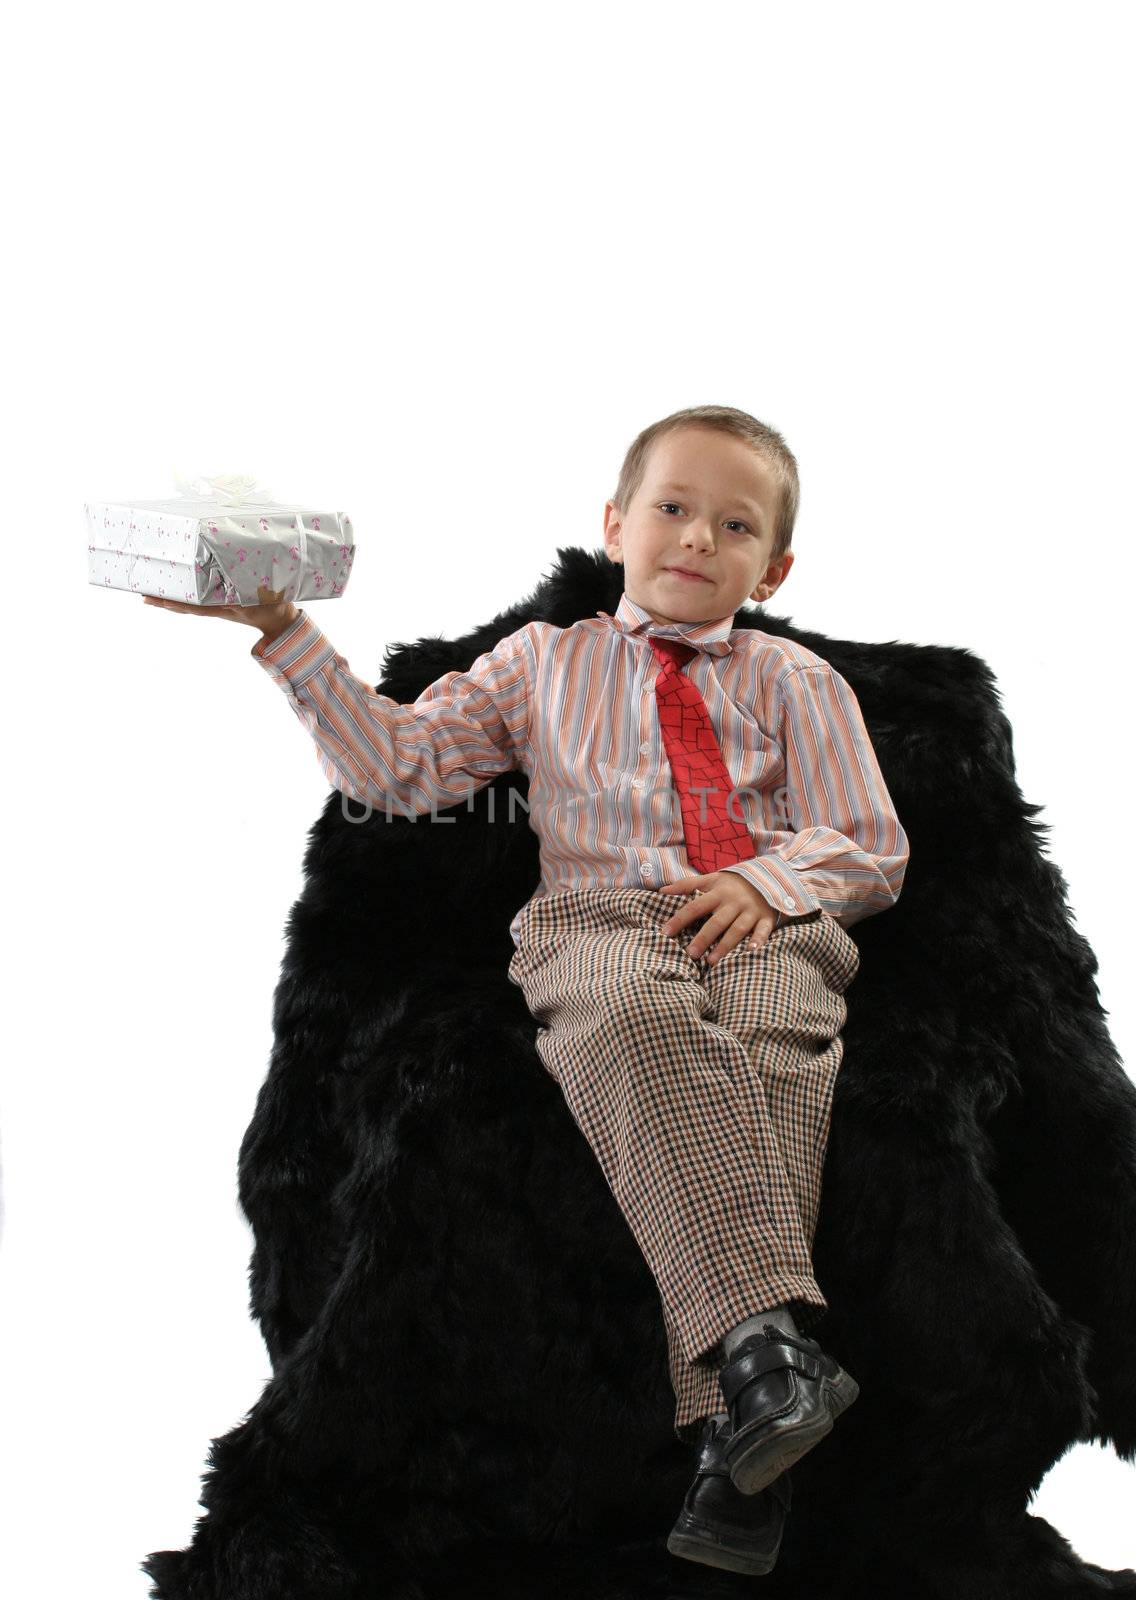 The boy sits in an armchair and holds a gift